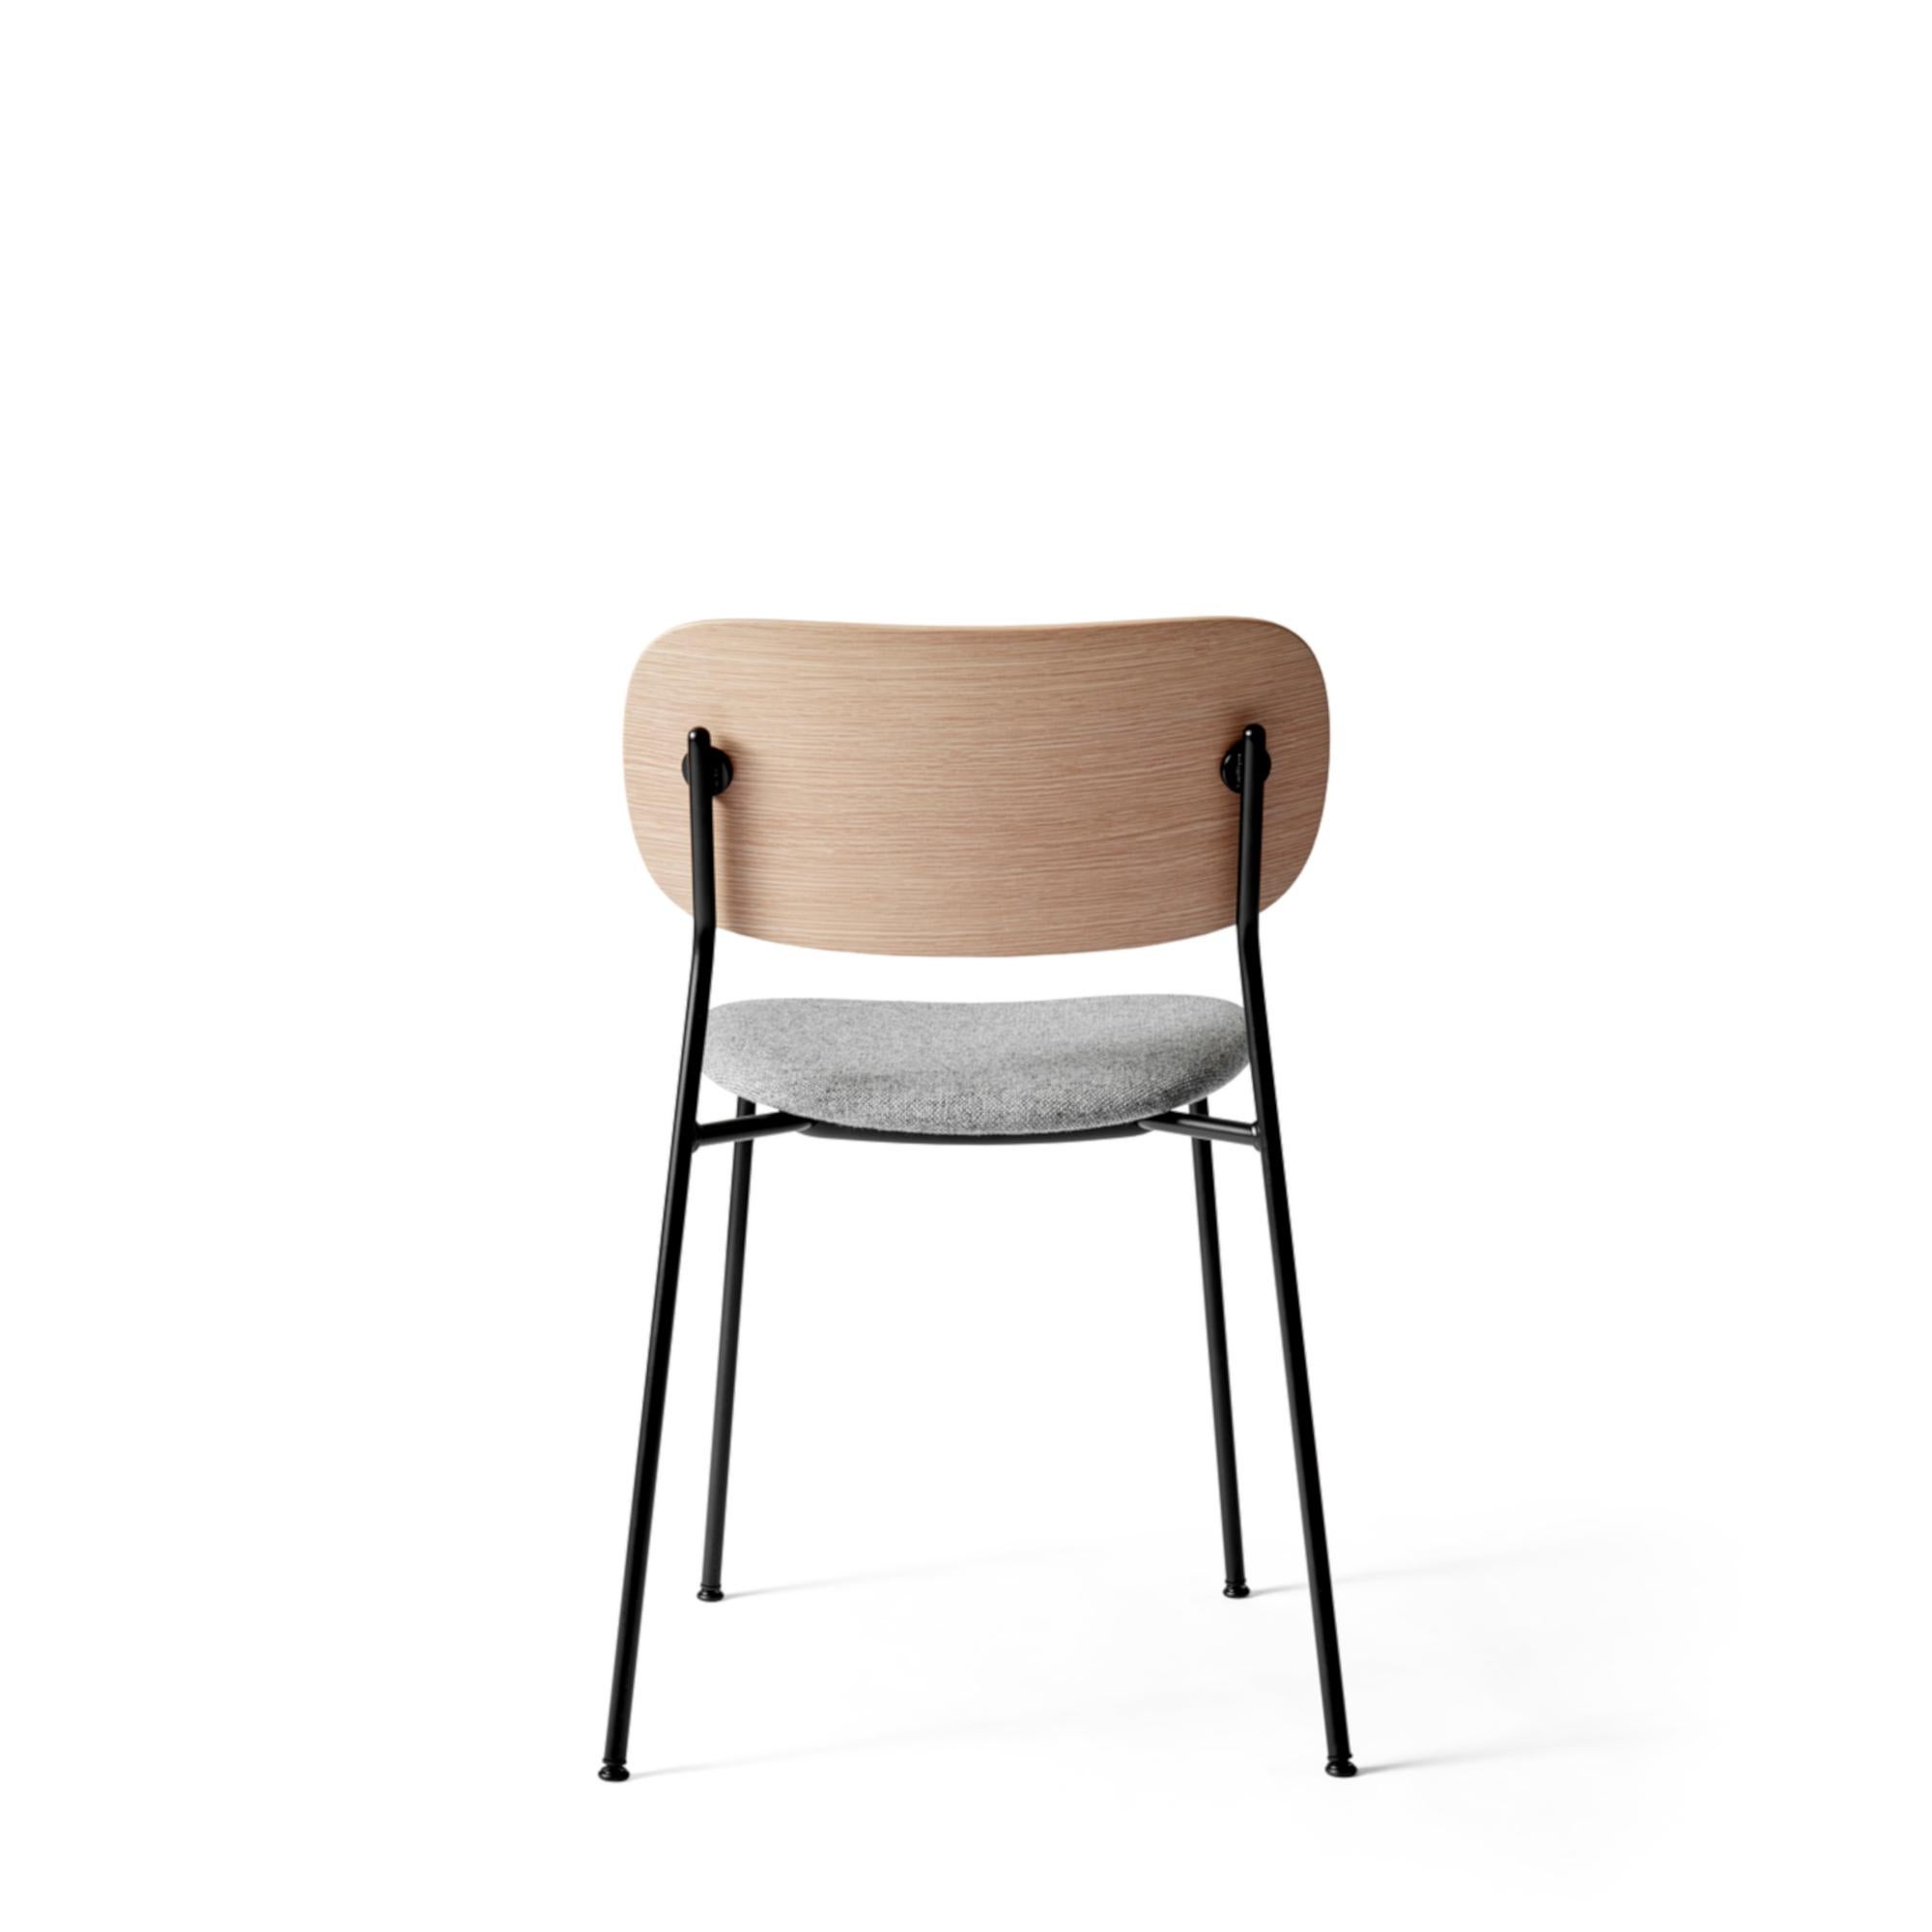 Together, mutually, in common: the words that define the prefix ‘co-’ are at the heart of our new Co Chair design. Conceived in collaboration with the office group and Norm Architects, the multifunctional chair adapts to a wide range of needs and